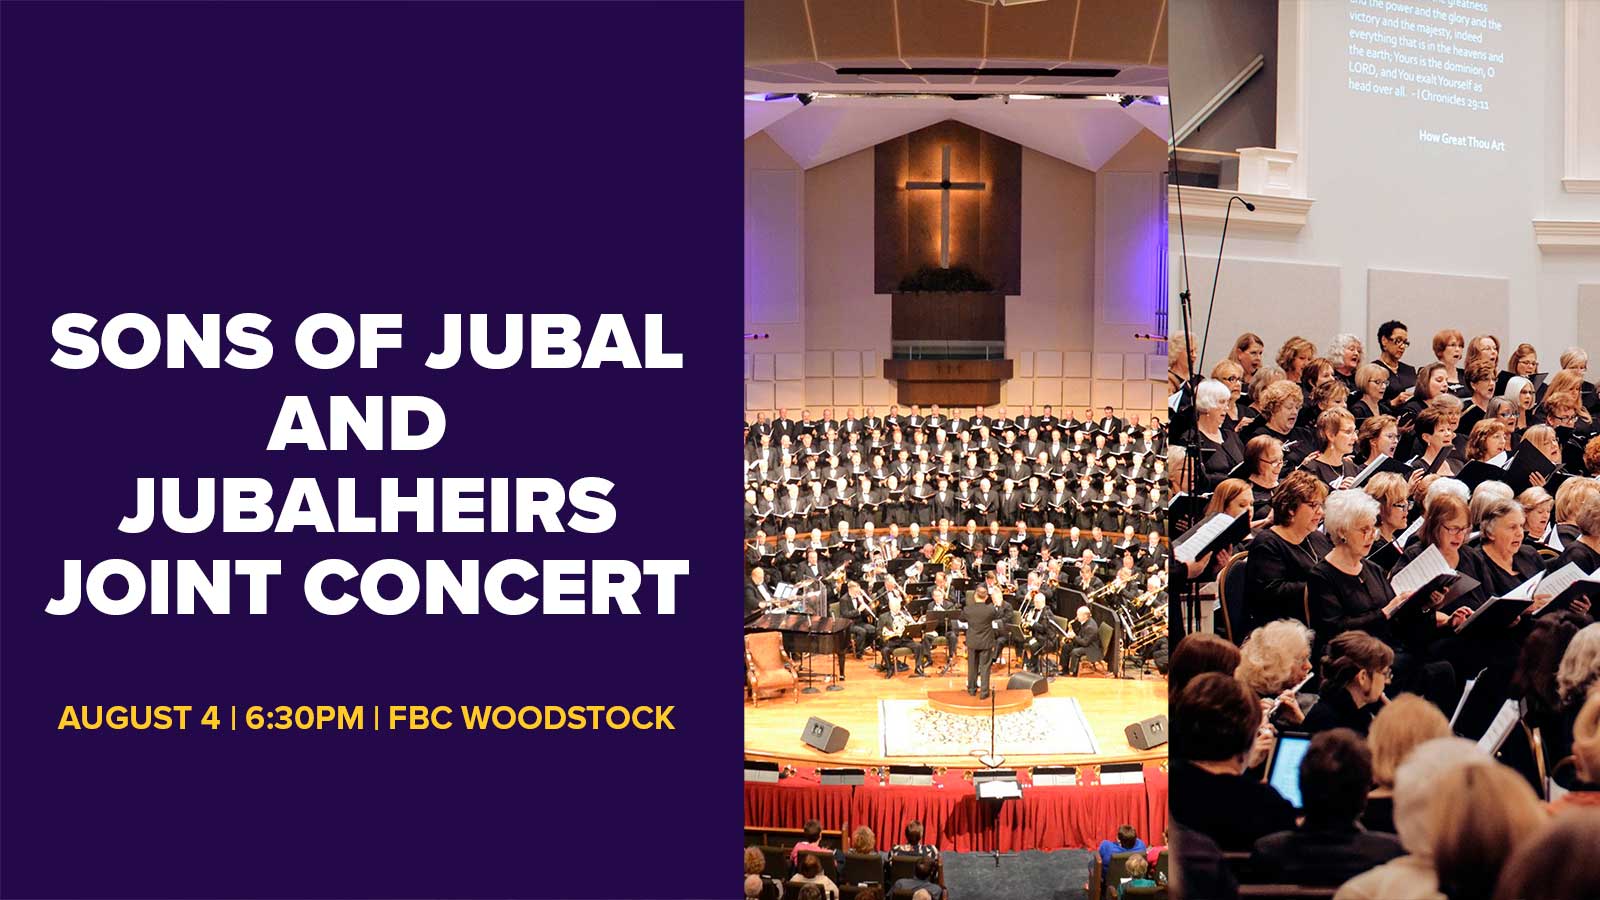 SONS OF JUBAL AND JUBALHEIRS JOINT CONCERT First Baptist Church Newnan